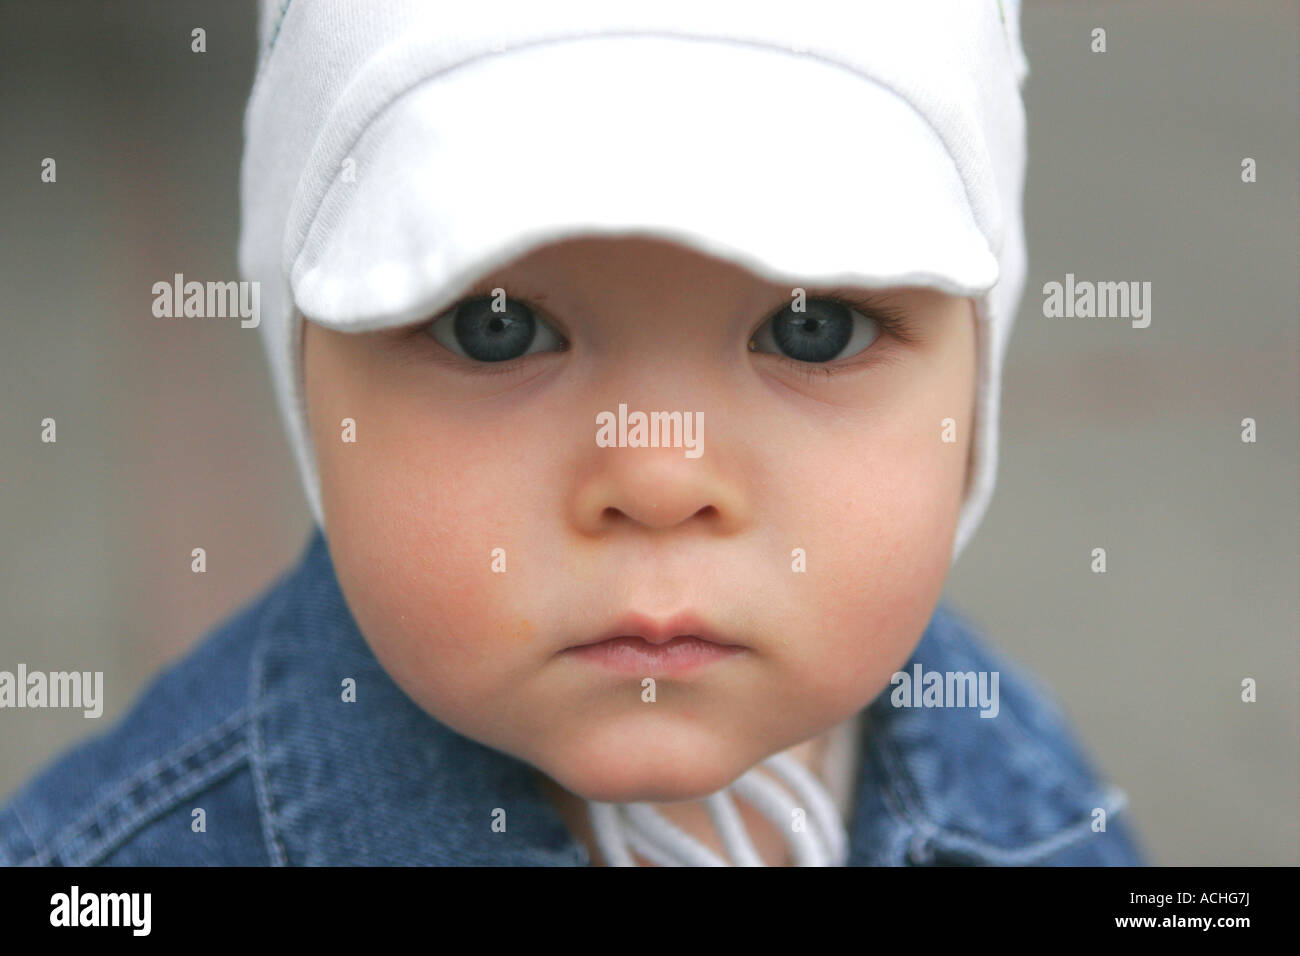 A little boy with white cap in jeans Portrait Stock Photo - Alamy